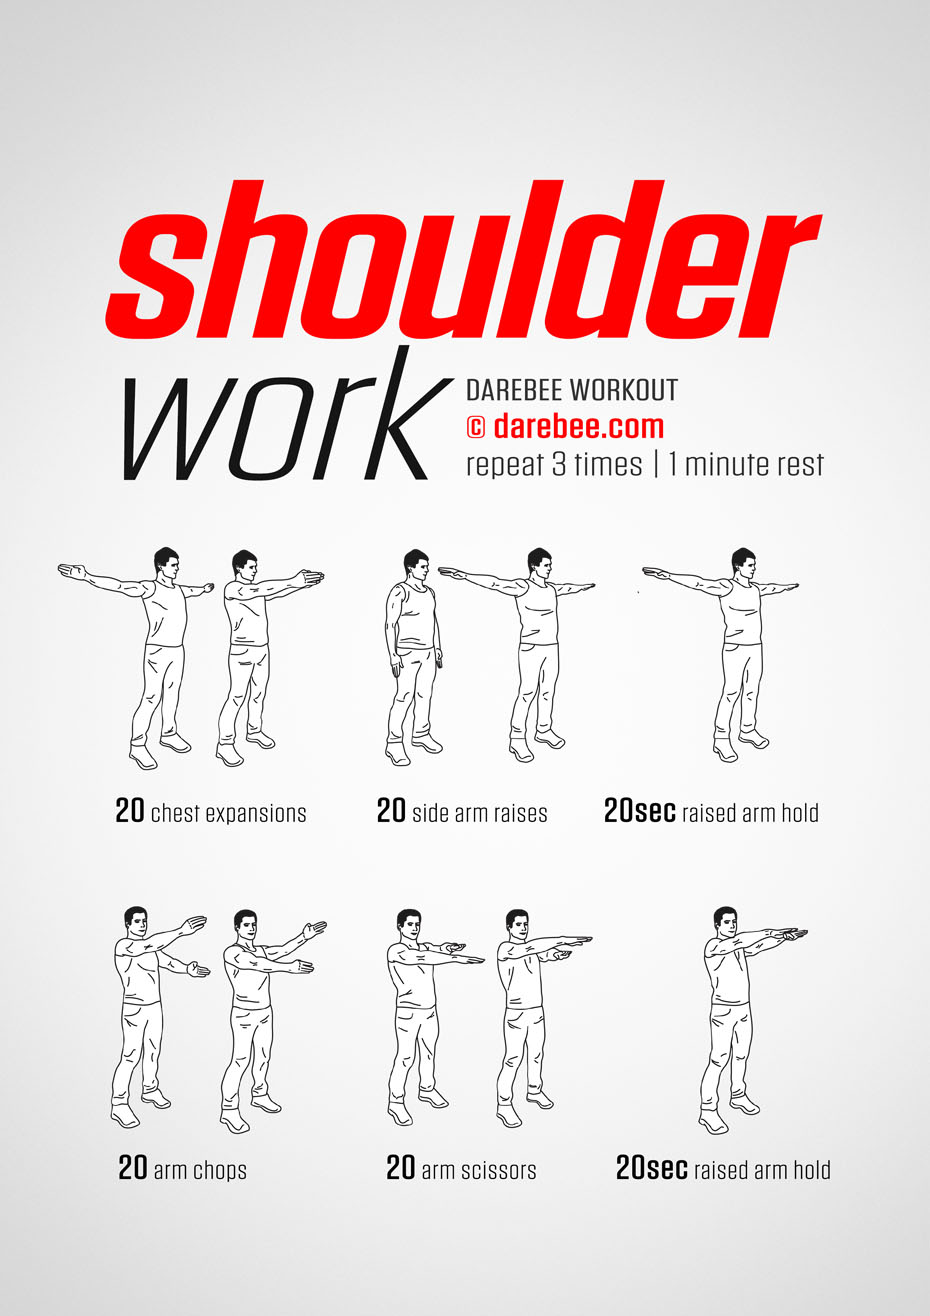 15 Minute P90X Shoulders And Arms Workout Calories Burned for Women